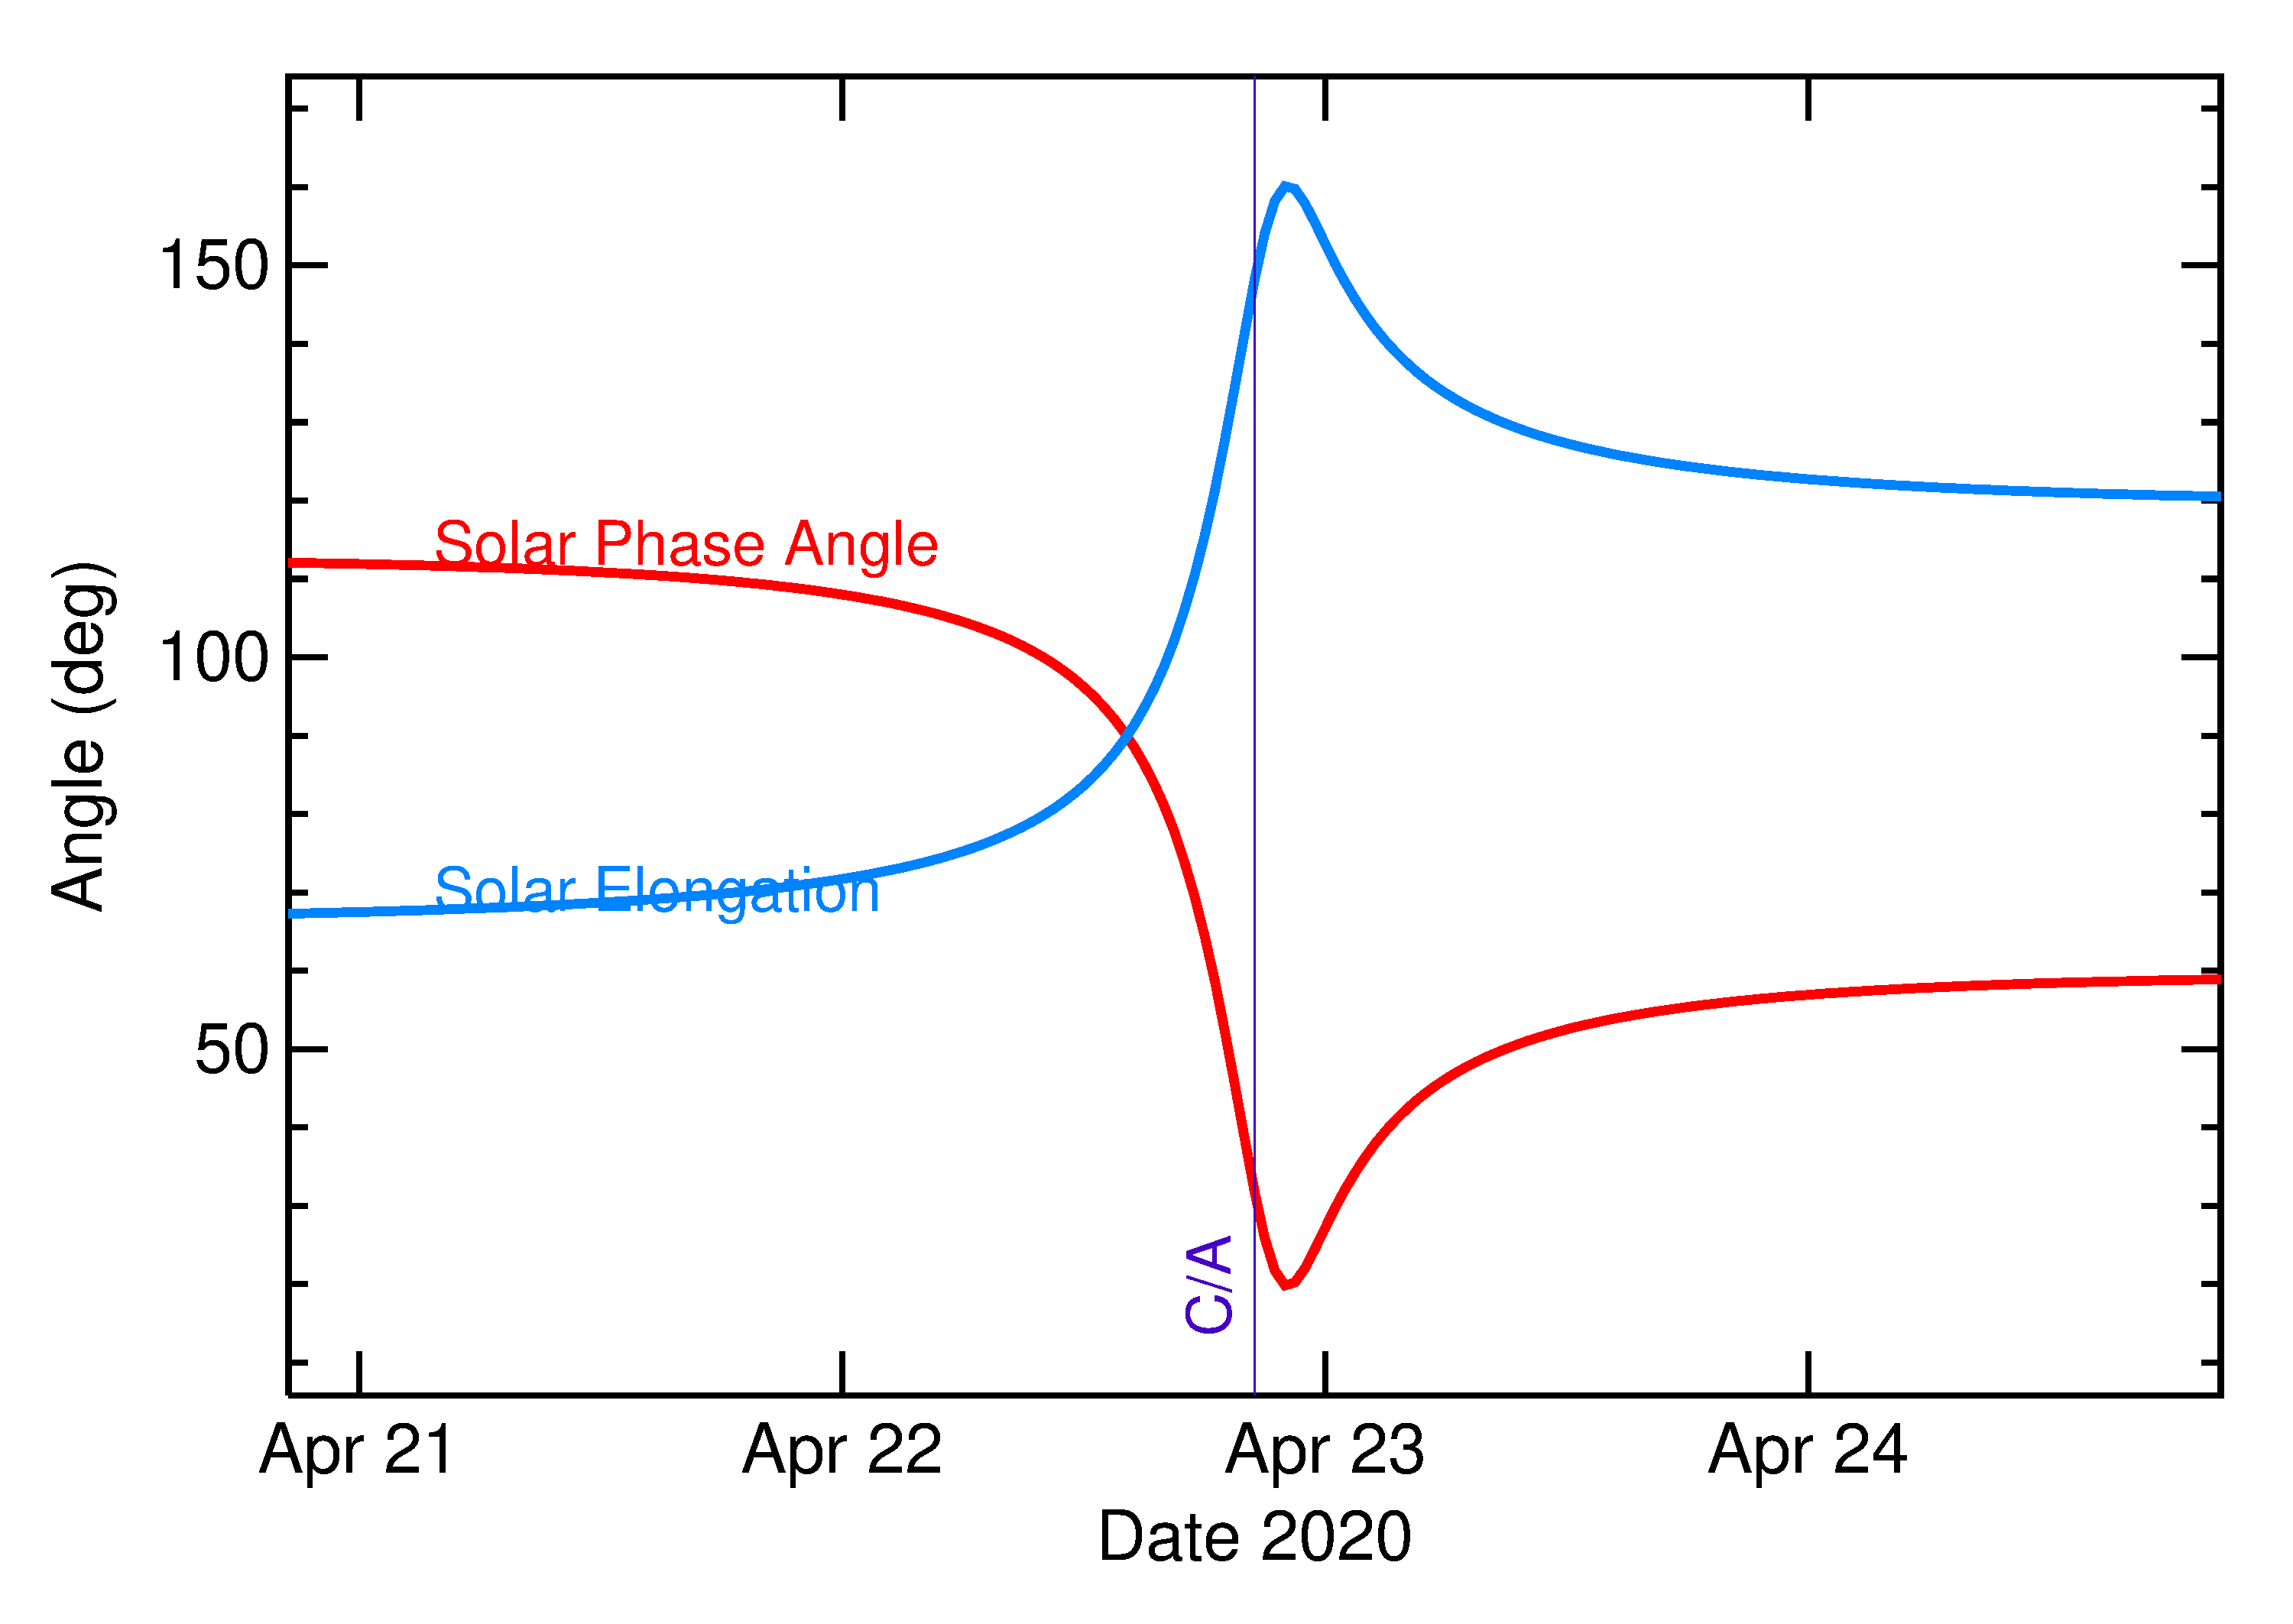 Solar Elongation and Solar Phase Angle of 2020 HU7 in the days around closest approach